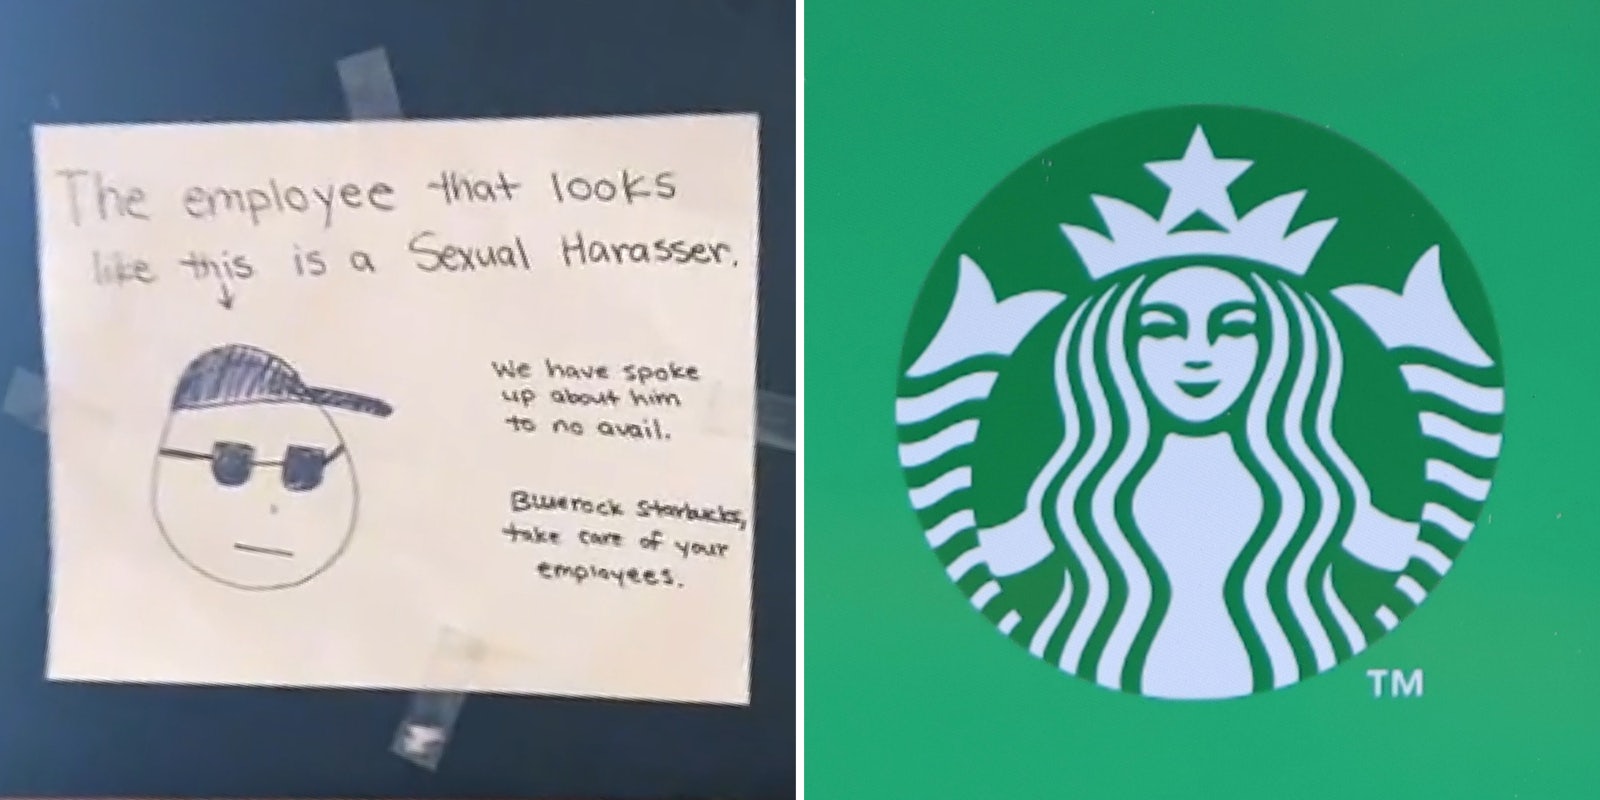 Hand drawn poster on chalk board 'The employee that looks like this (down arrow pointing to simple drawing man in glasses and hat) is a sexual harasser We have spoke about him to no avail, Bluerock Starbucks, take care of your employees.' (l) Starbucks logo on green background (r)